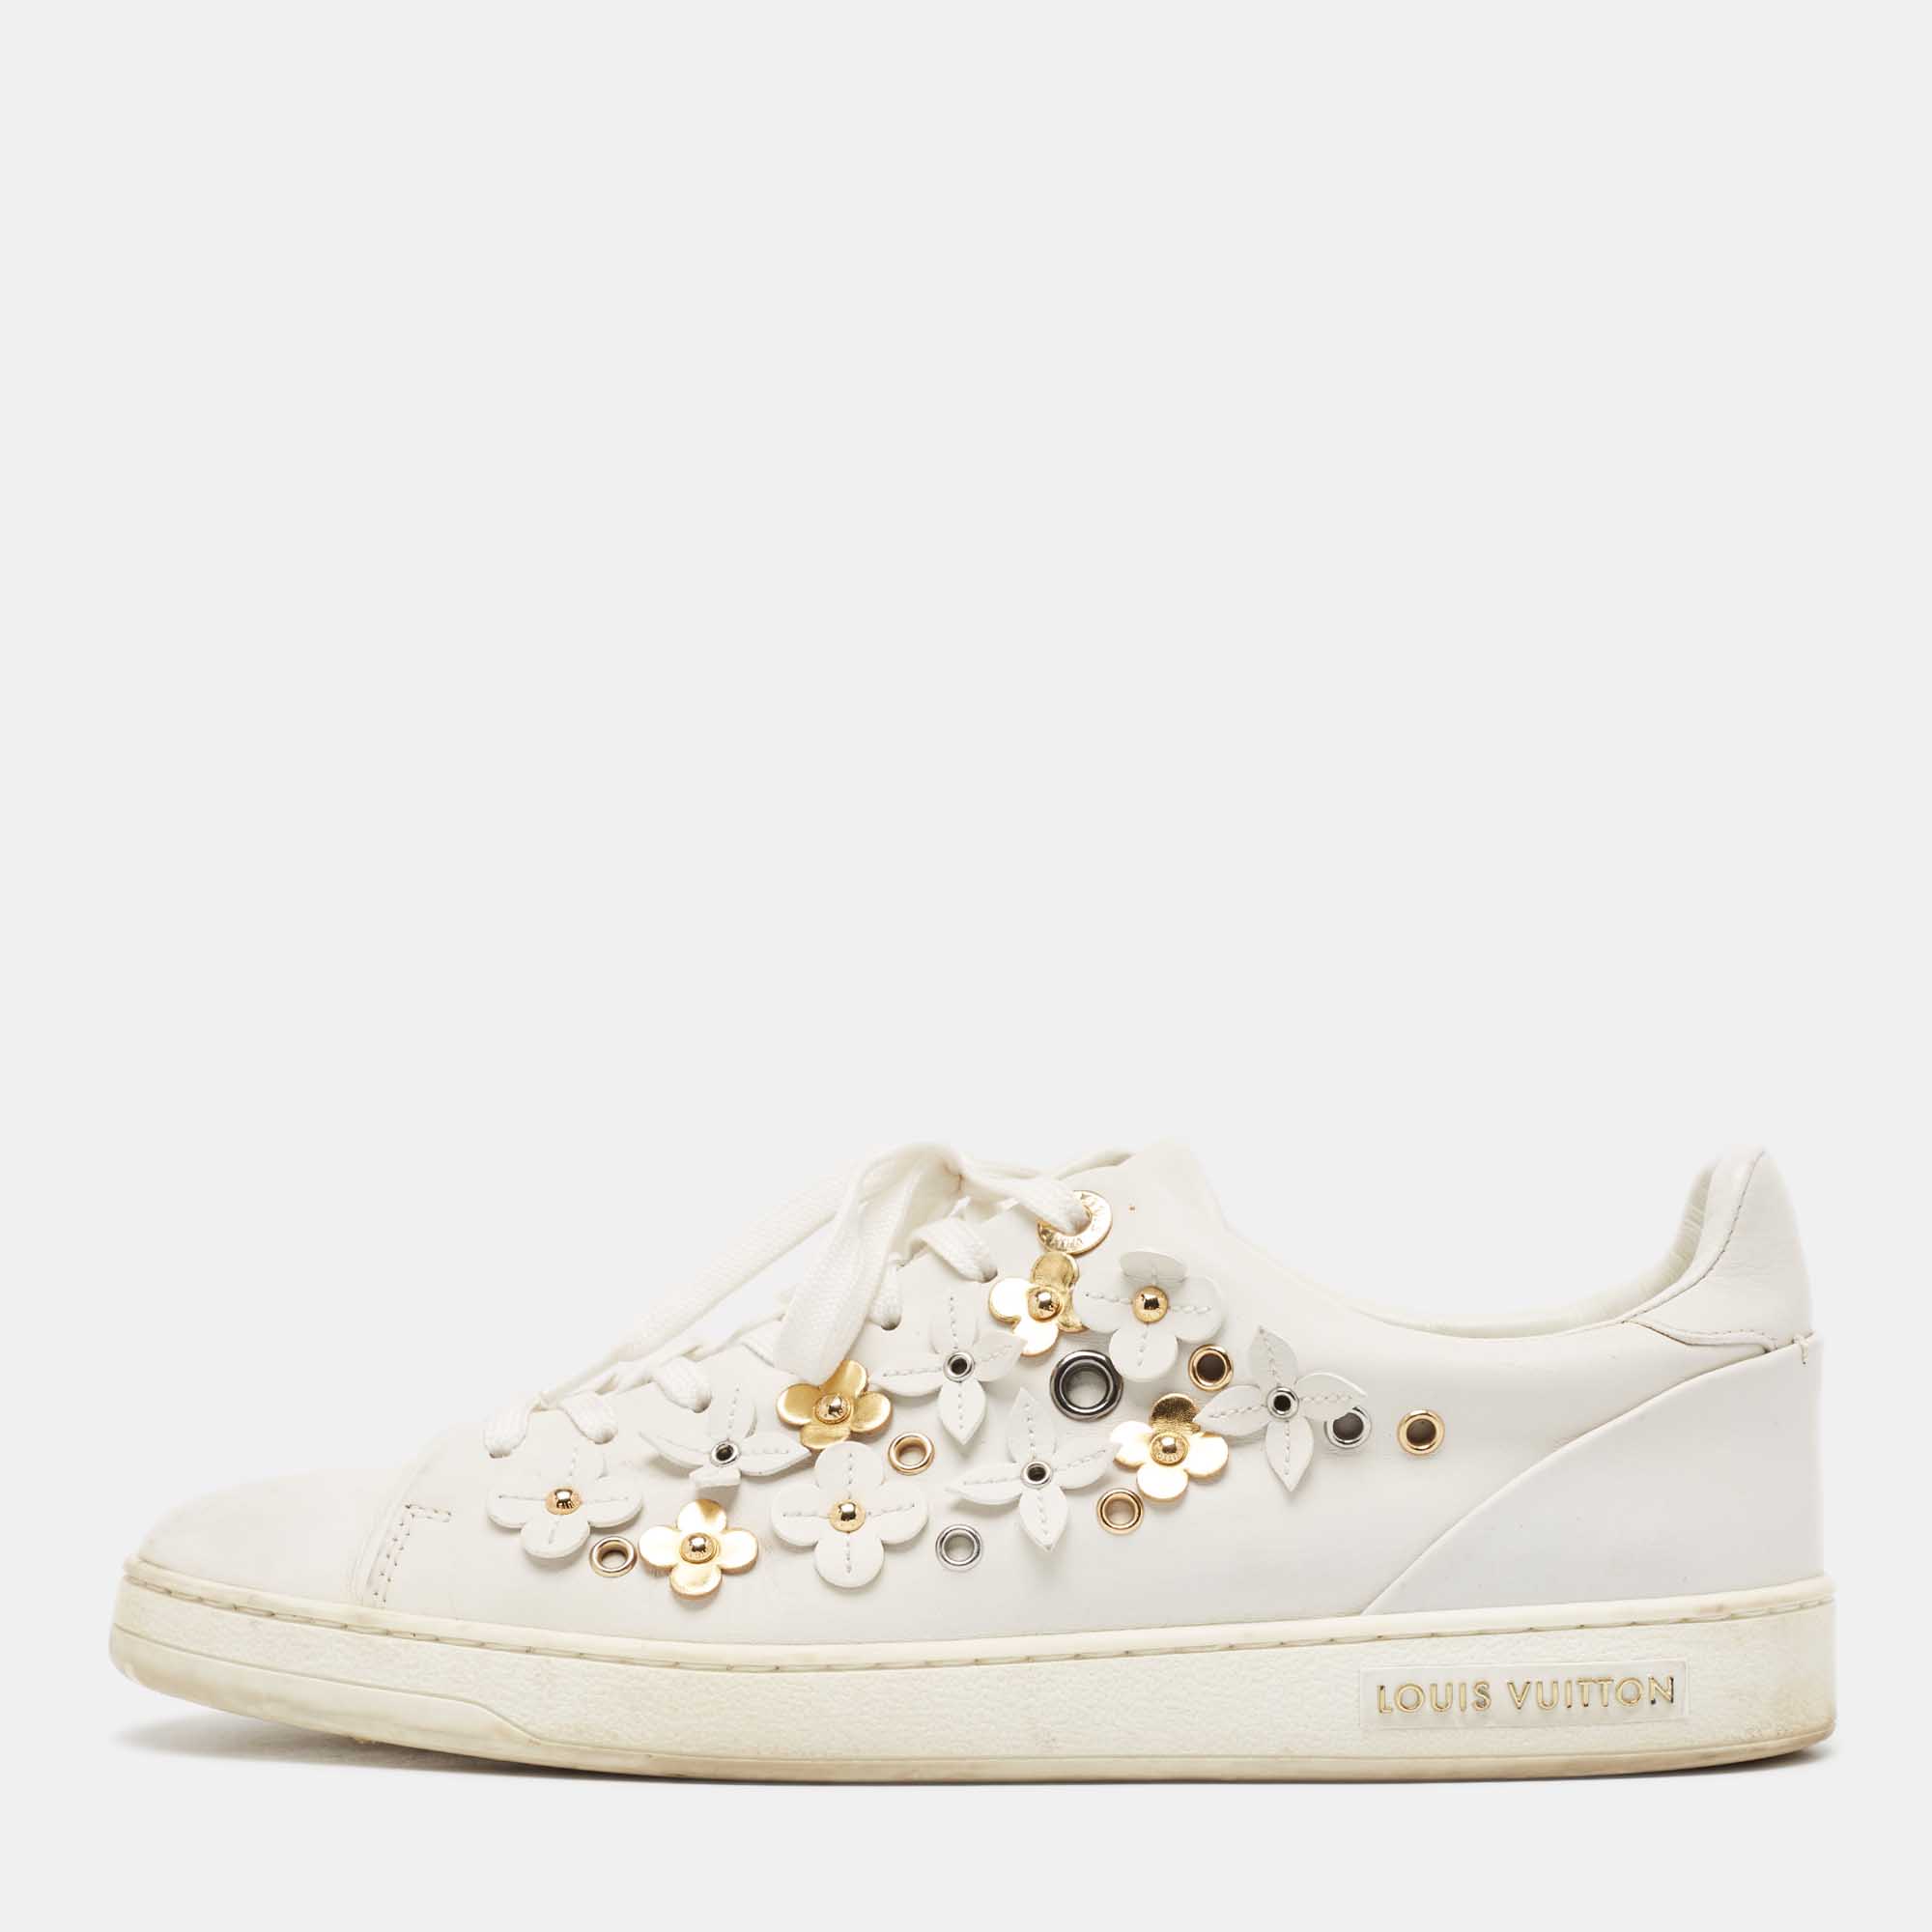 Louis vuitton white leather embellished frontrow sneakers size 41